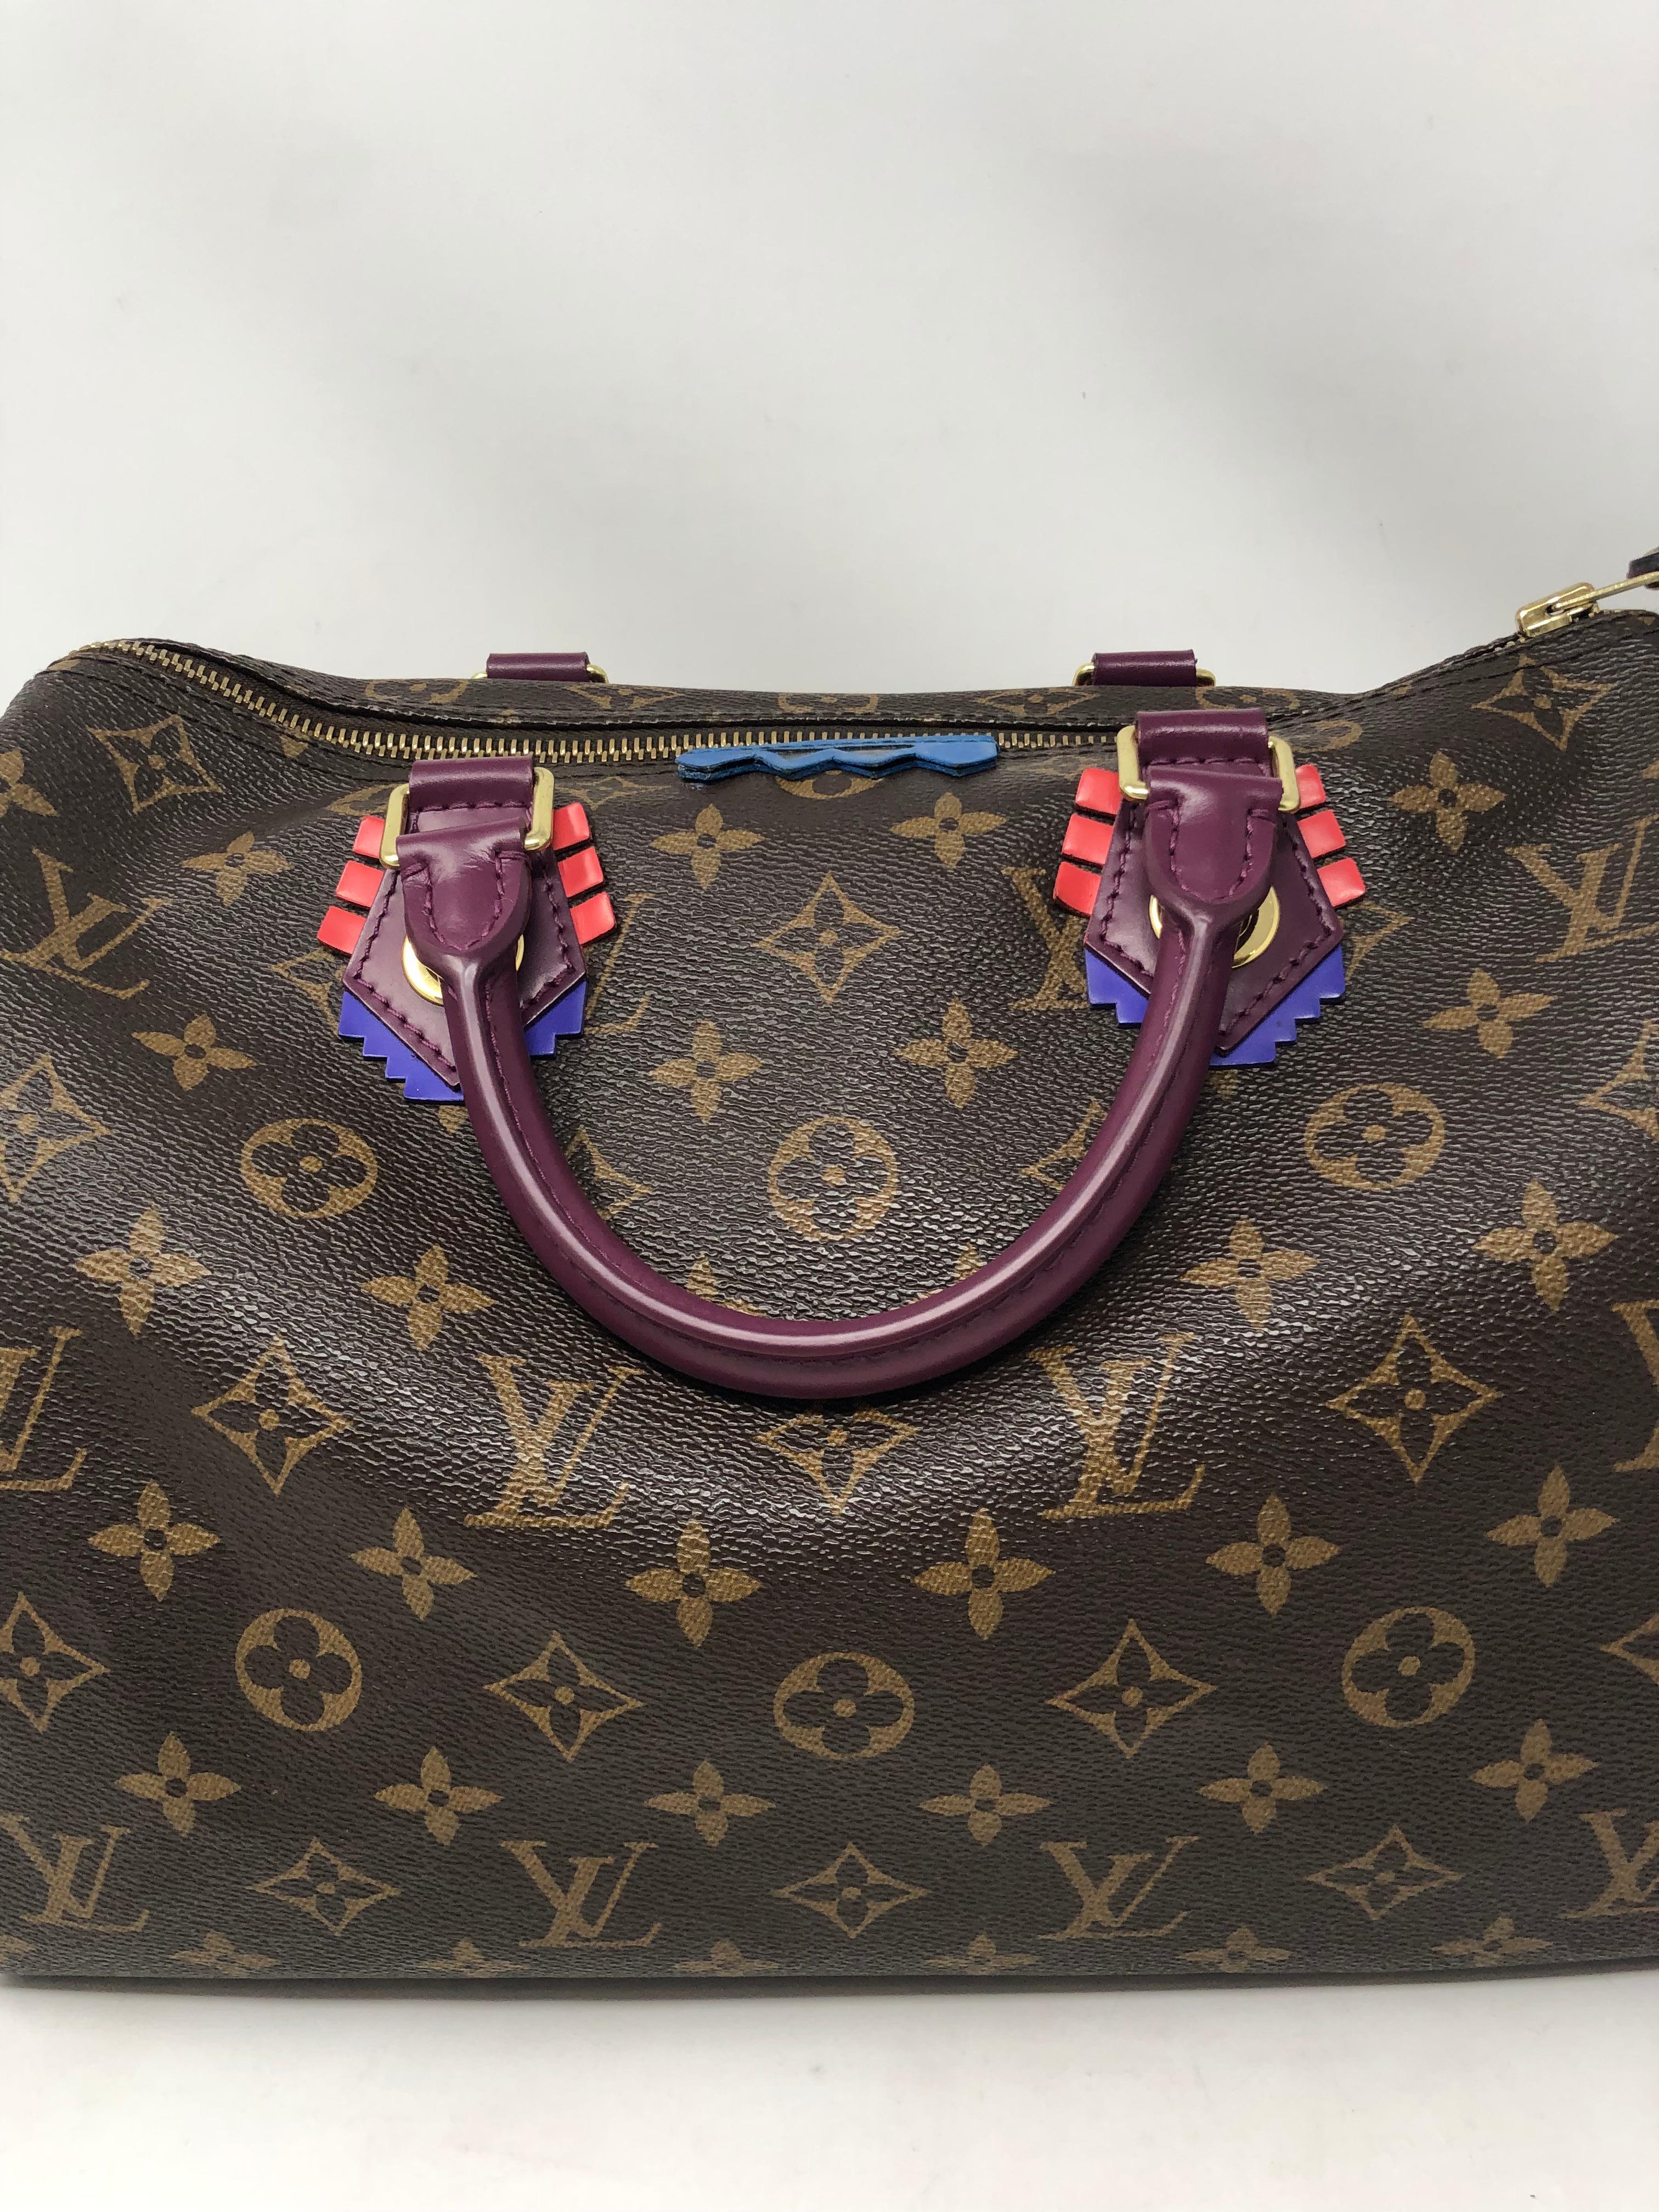 Louis Vuitton Totem Speedy 30. Rare and limited. Purple leather handles with tribal style embellished details. Collector's piece. Guaranteed authentic. 